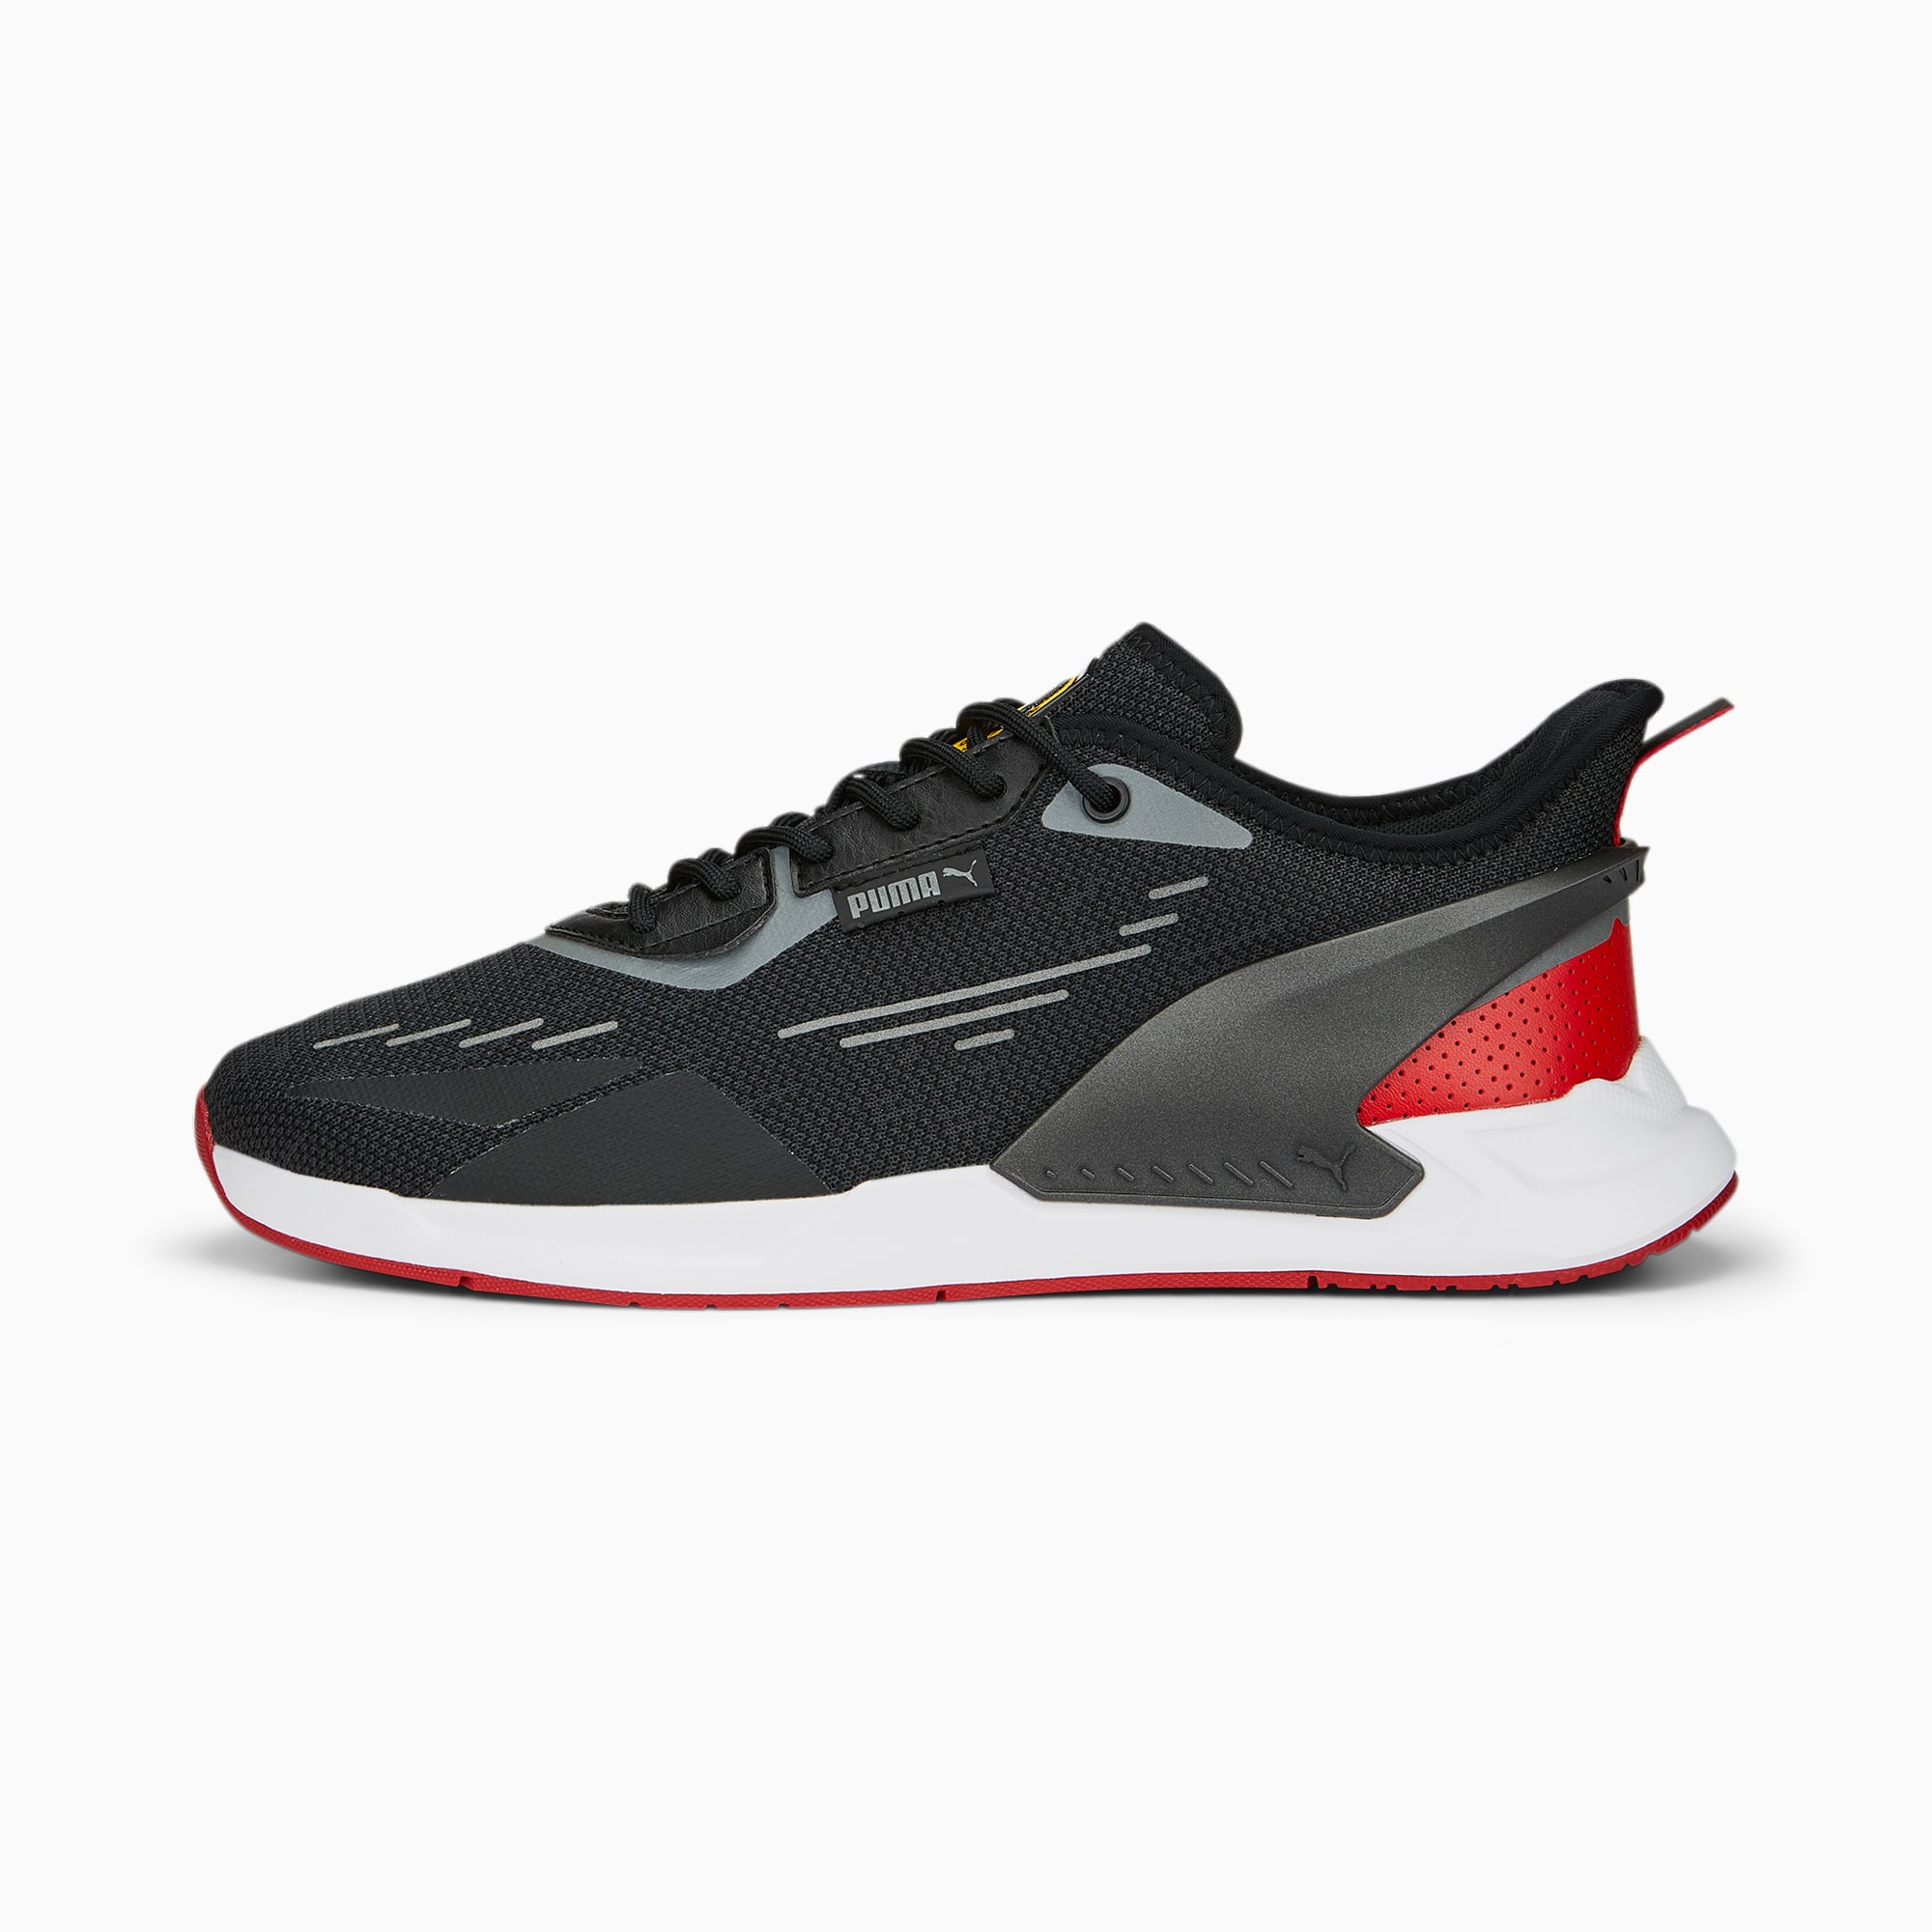 Step into the iconic world of the PUMA Slipstream where basketball